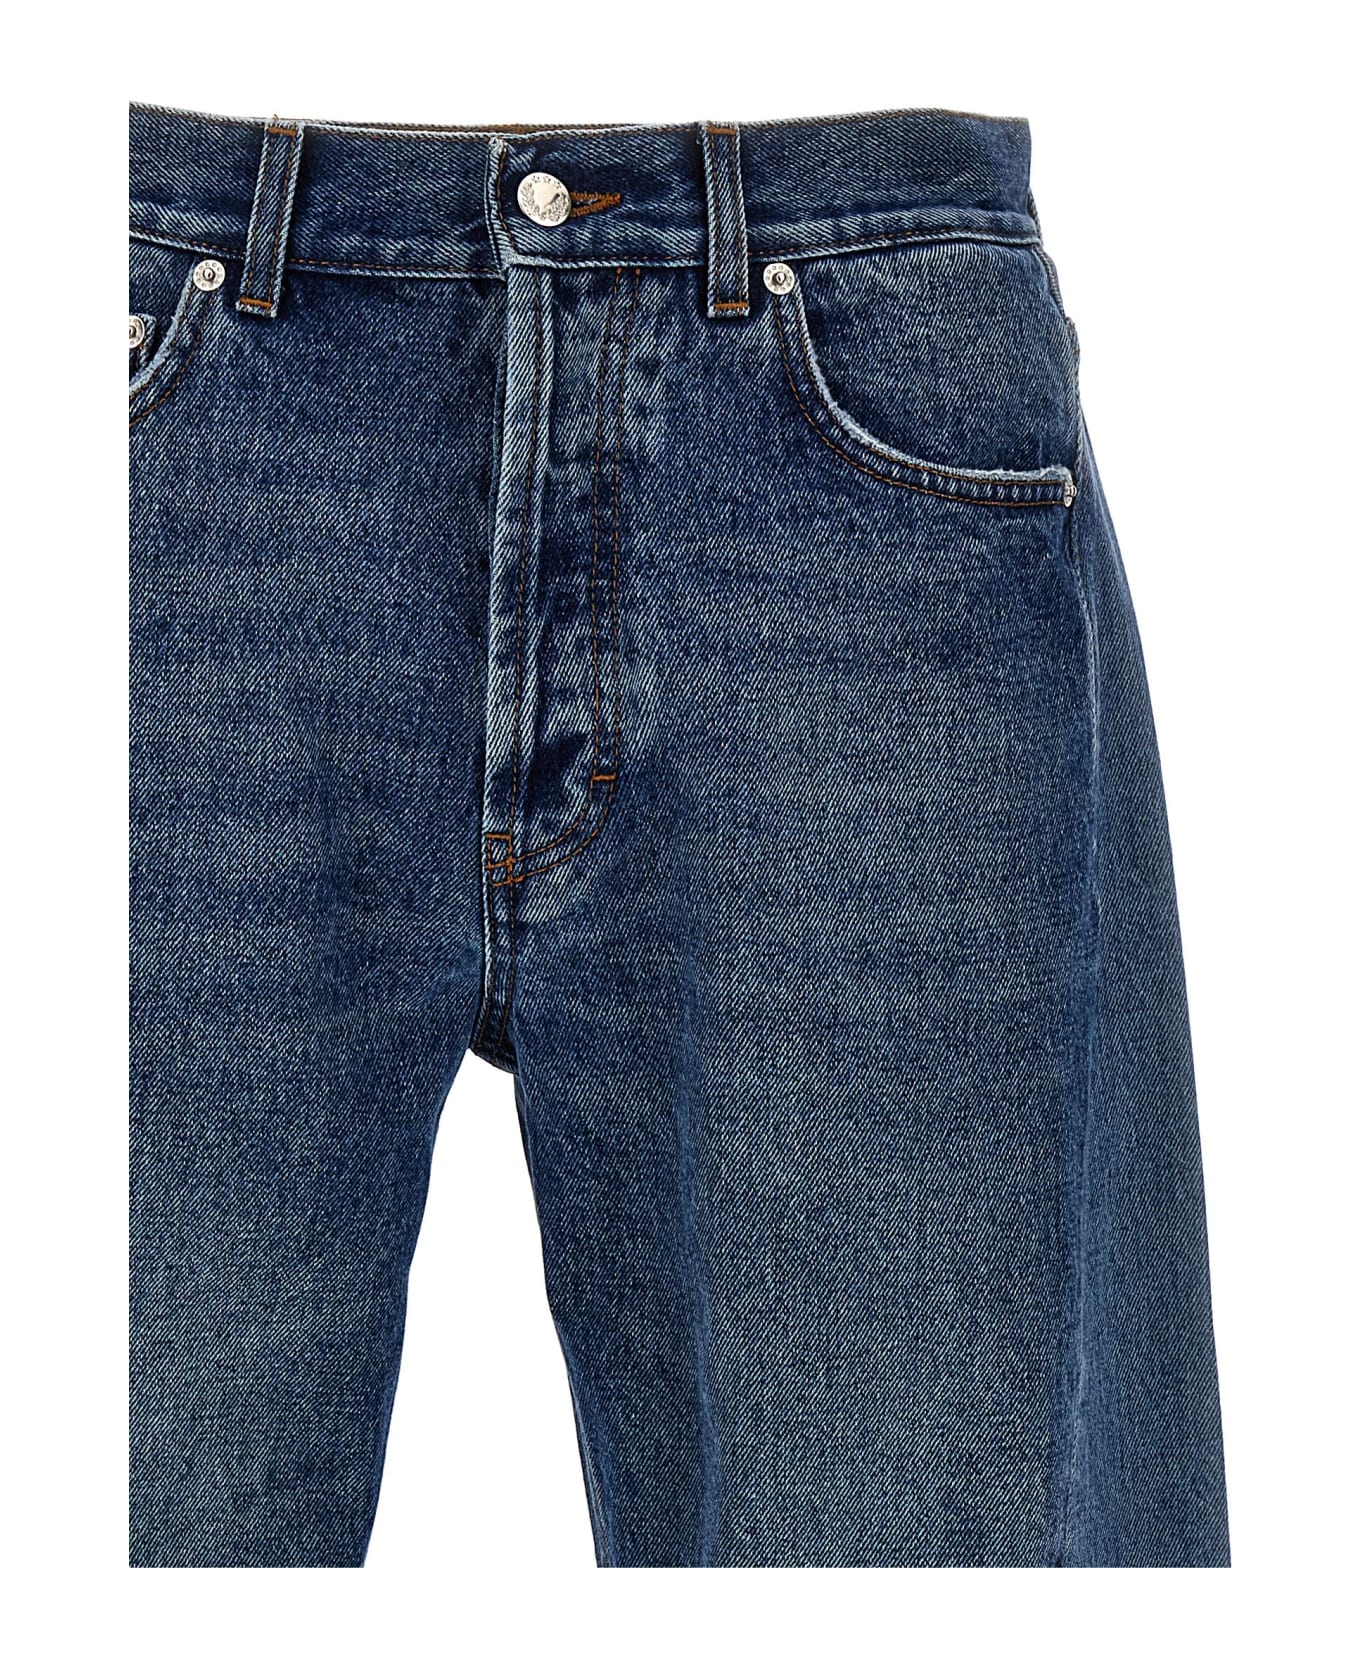 Séfr 'twisted' Jeans - Blue デニム